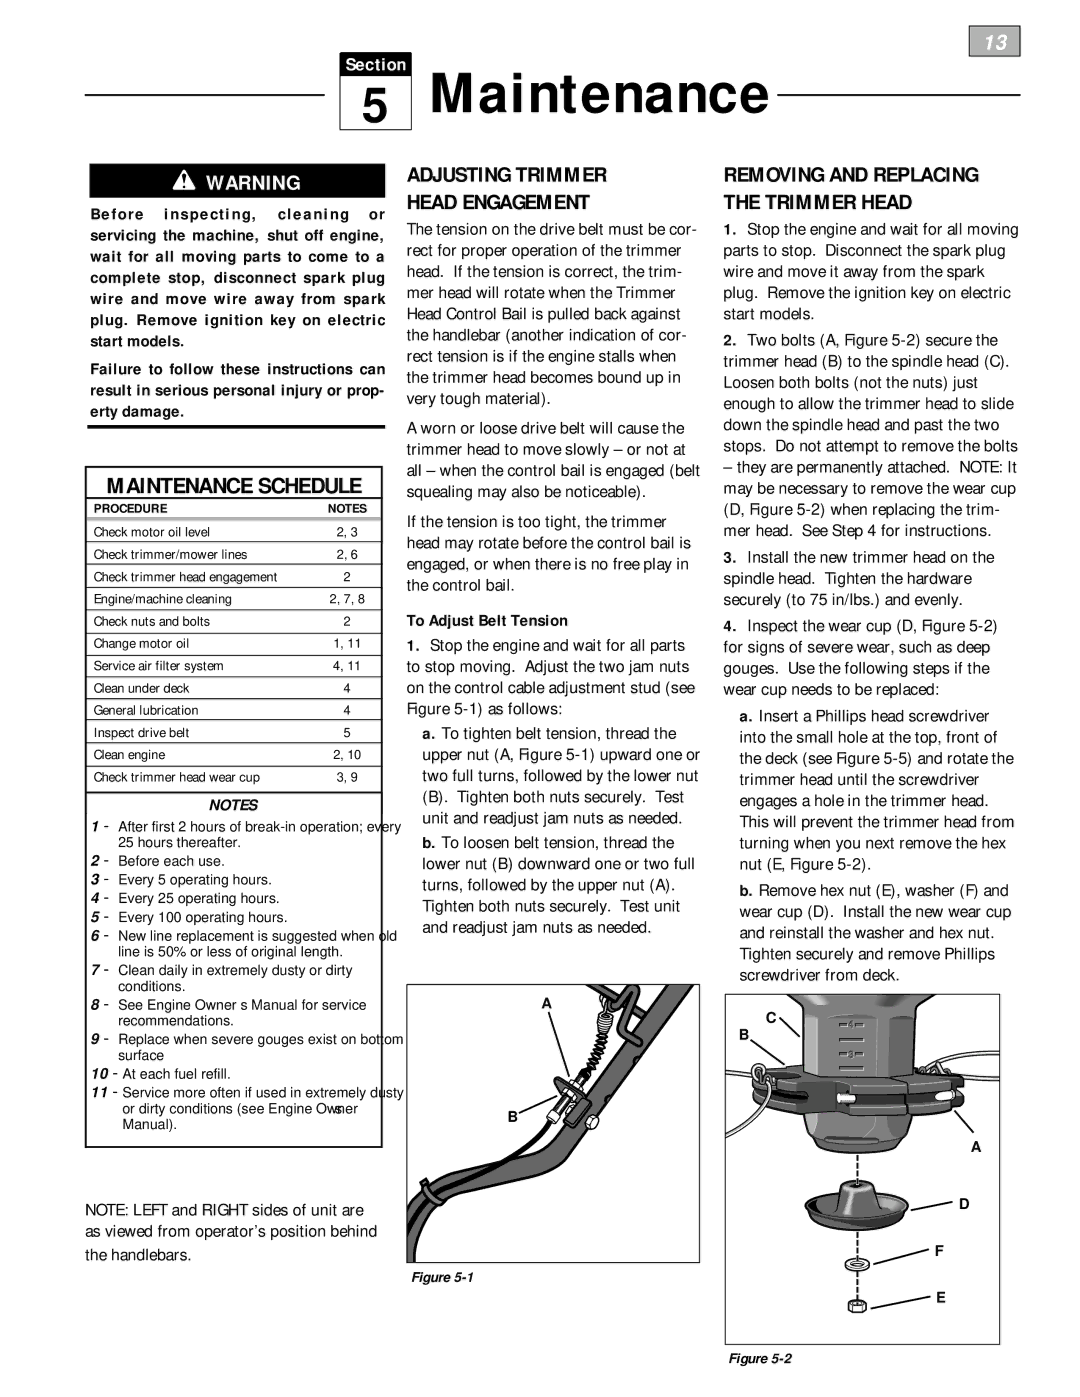 Troy-Bilt 52070 Maintenance Schedule, Adjusting Trimmer Head Engagement, Removing and Replacing the Trimmer Head 